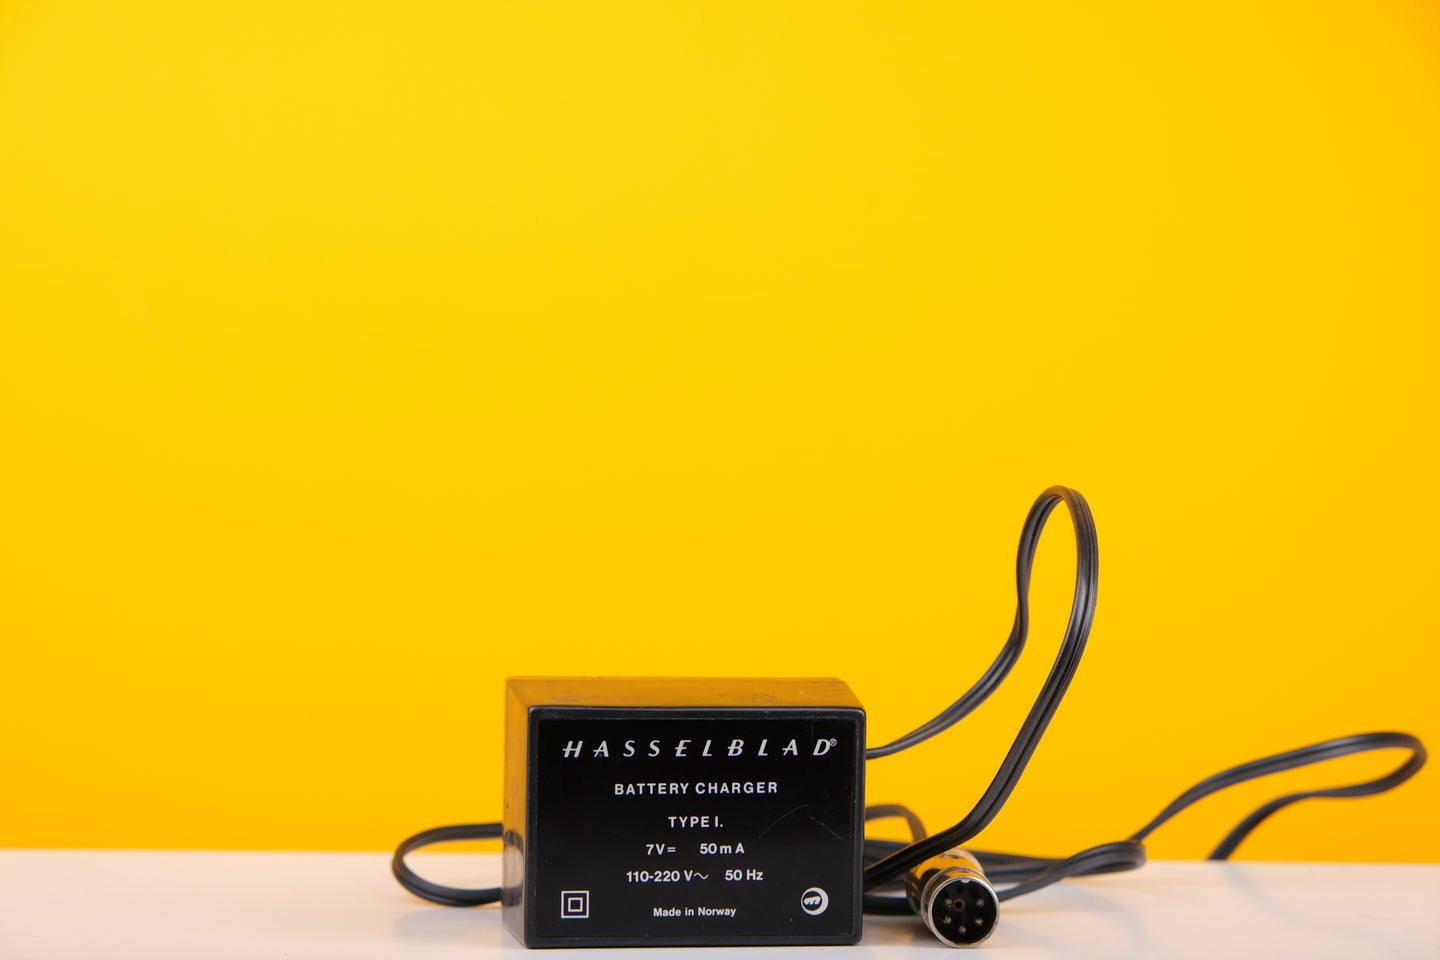 Hasselblad Battery Charger Type 1